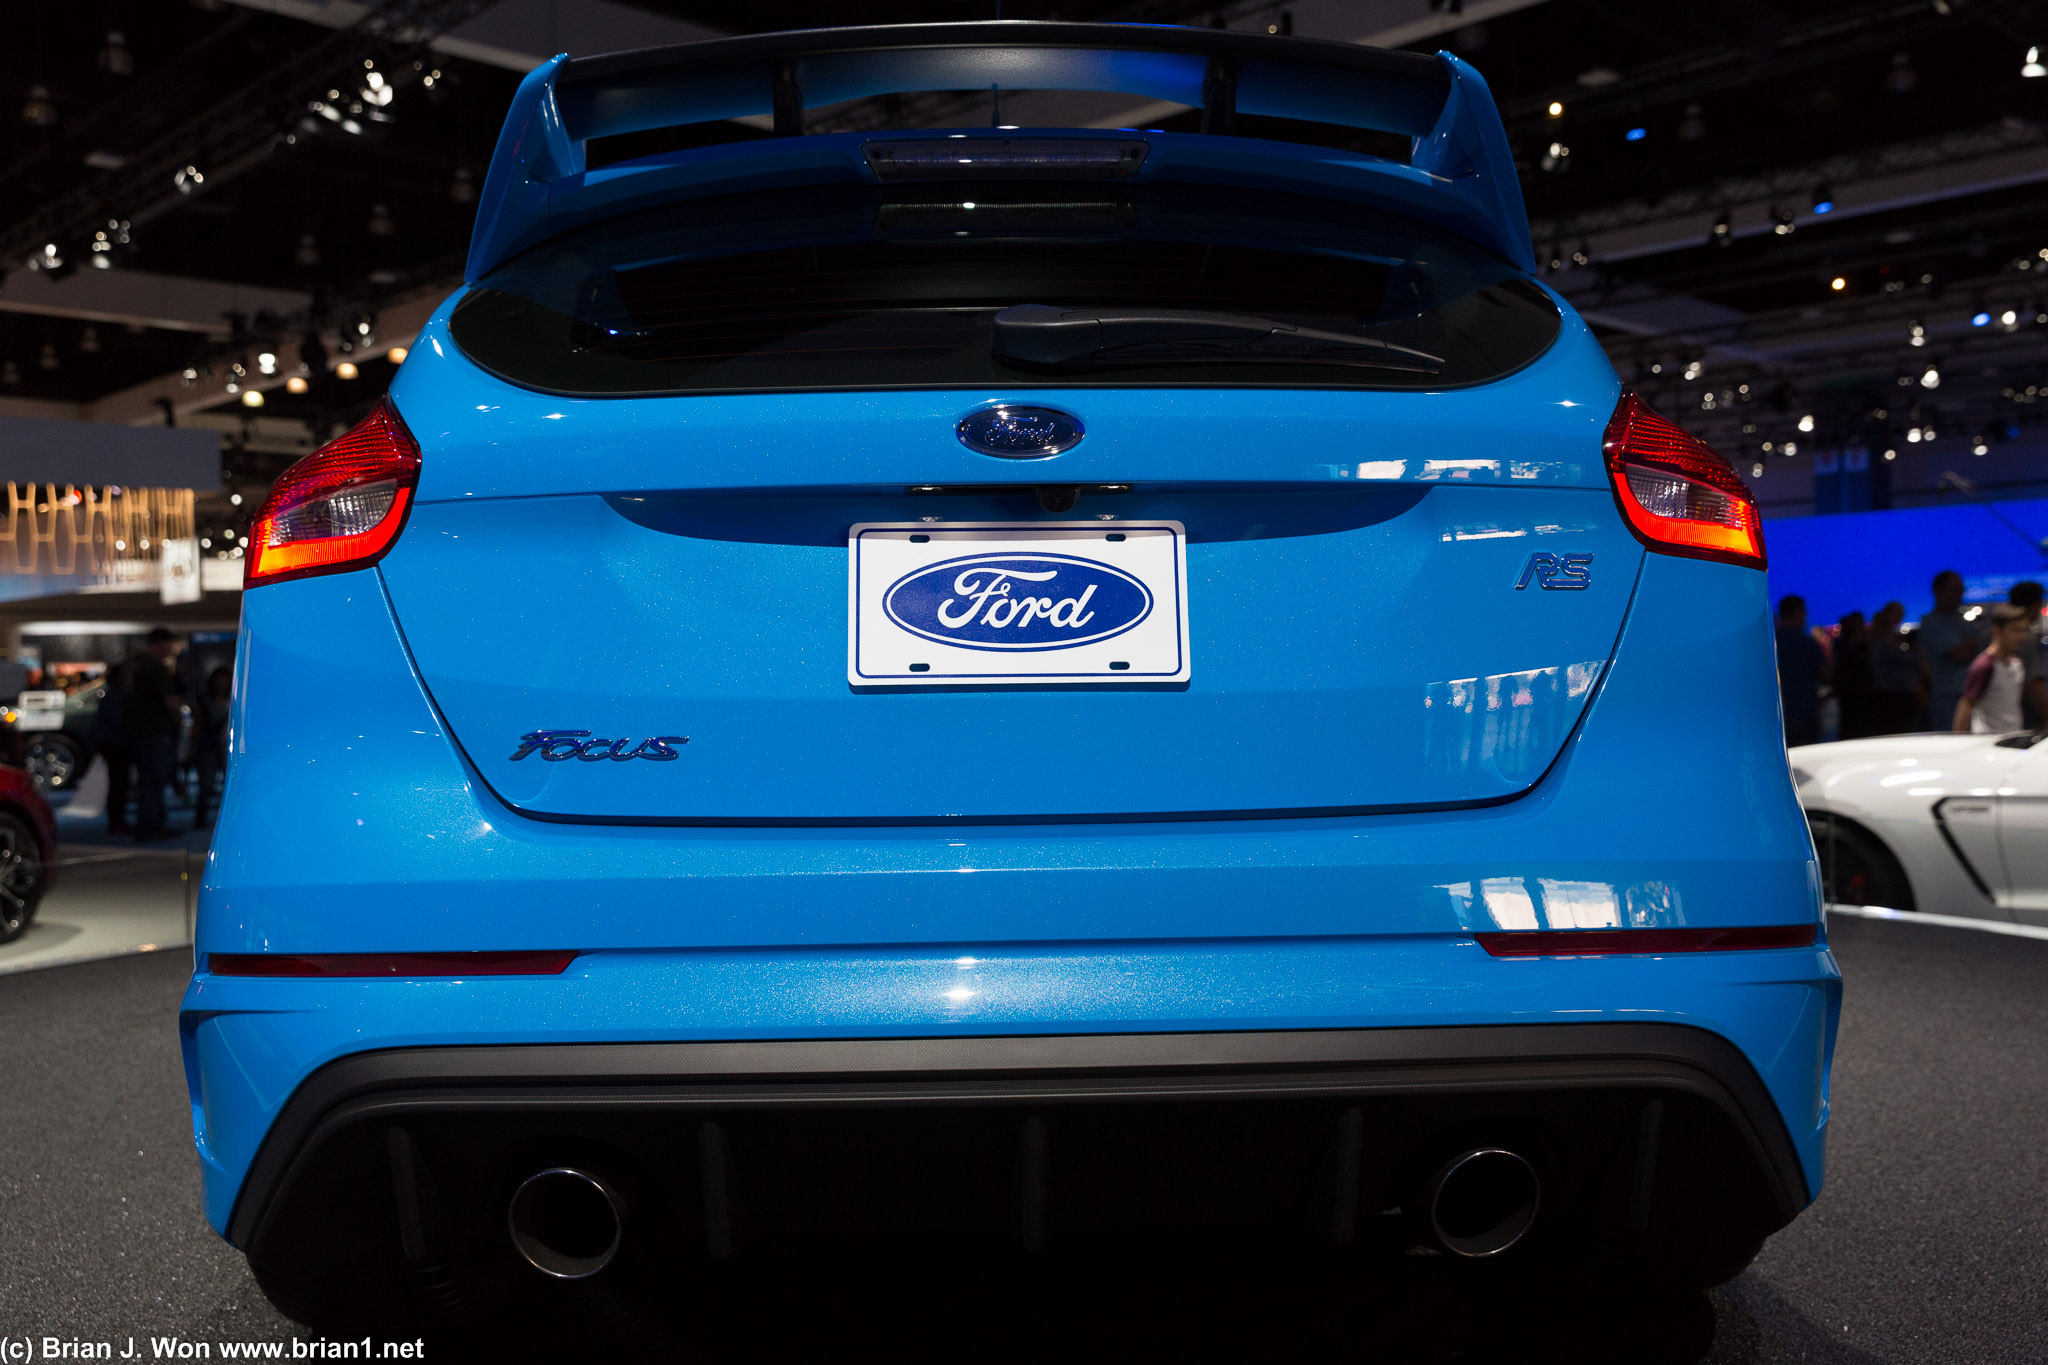 Ford Escape RS tail is not all that good looking either.